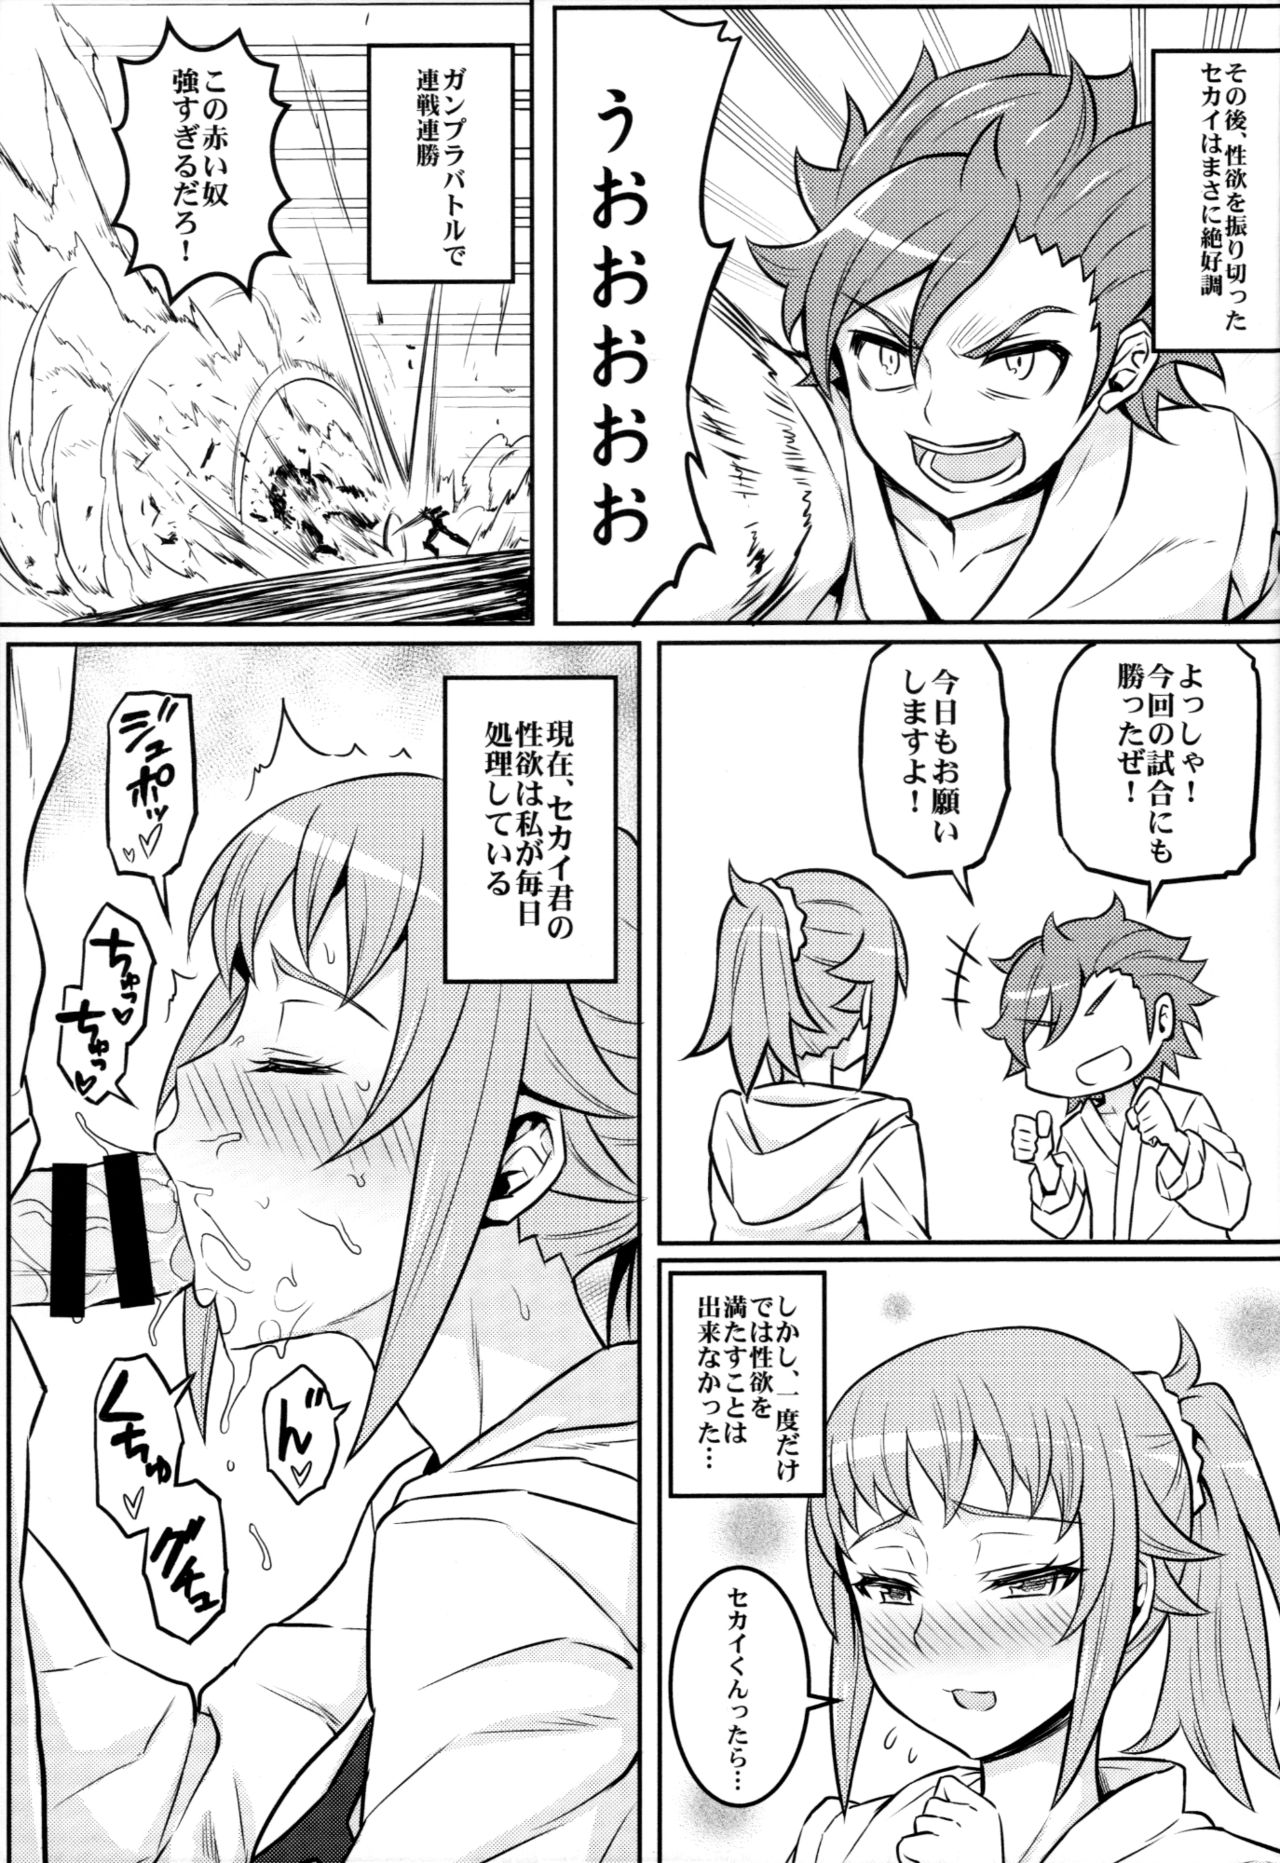 (C87) [Green Ketchup (Zhen Lu)] Nayamashii Fighters (Gundam Build Fighters Try) page 10 full